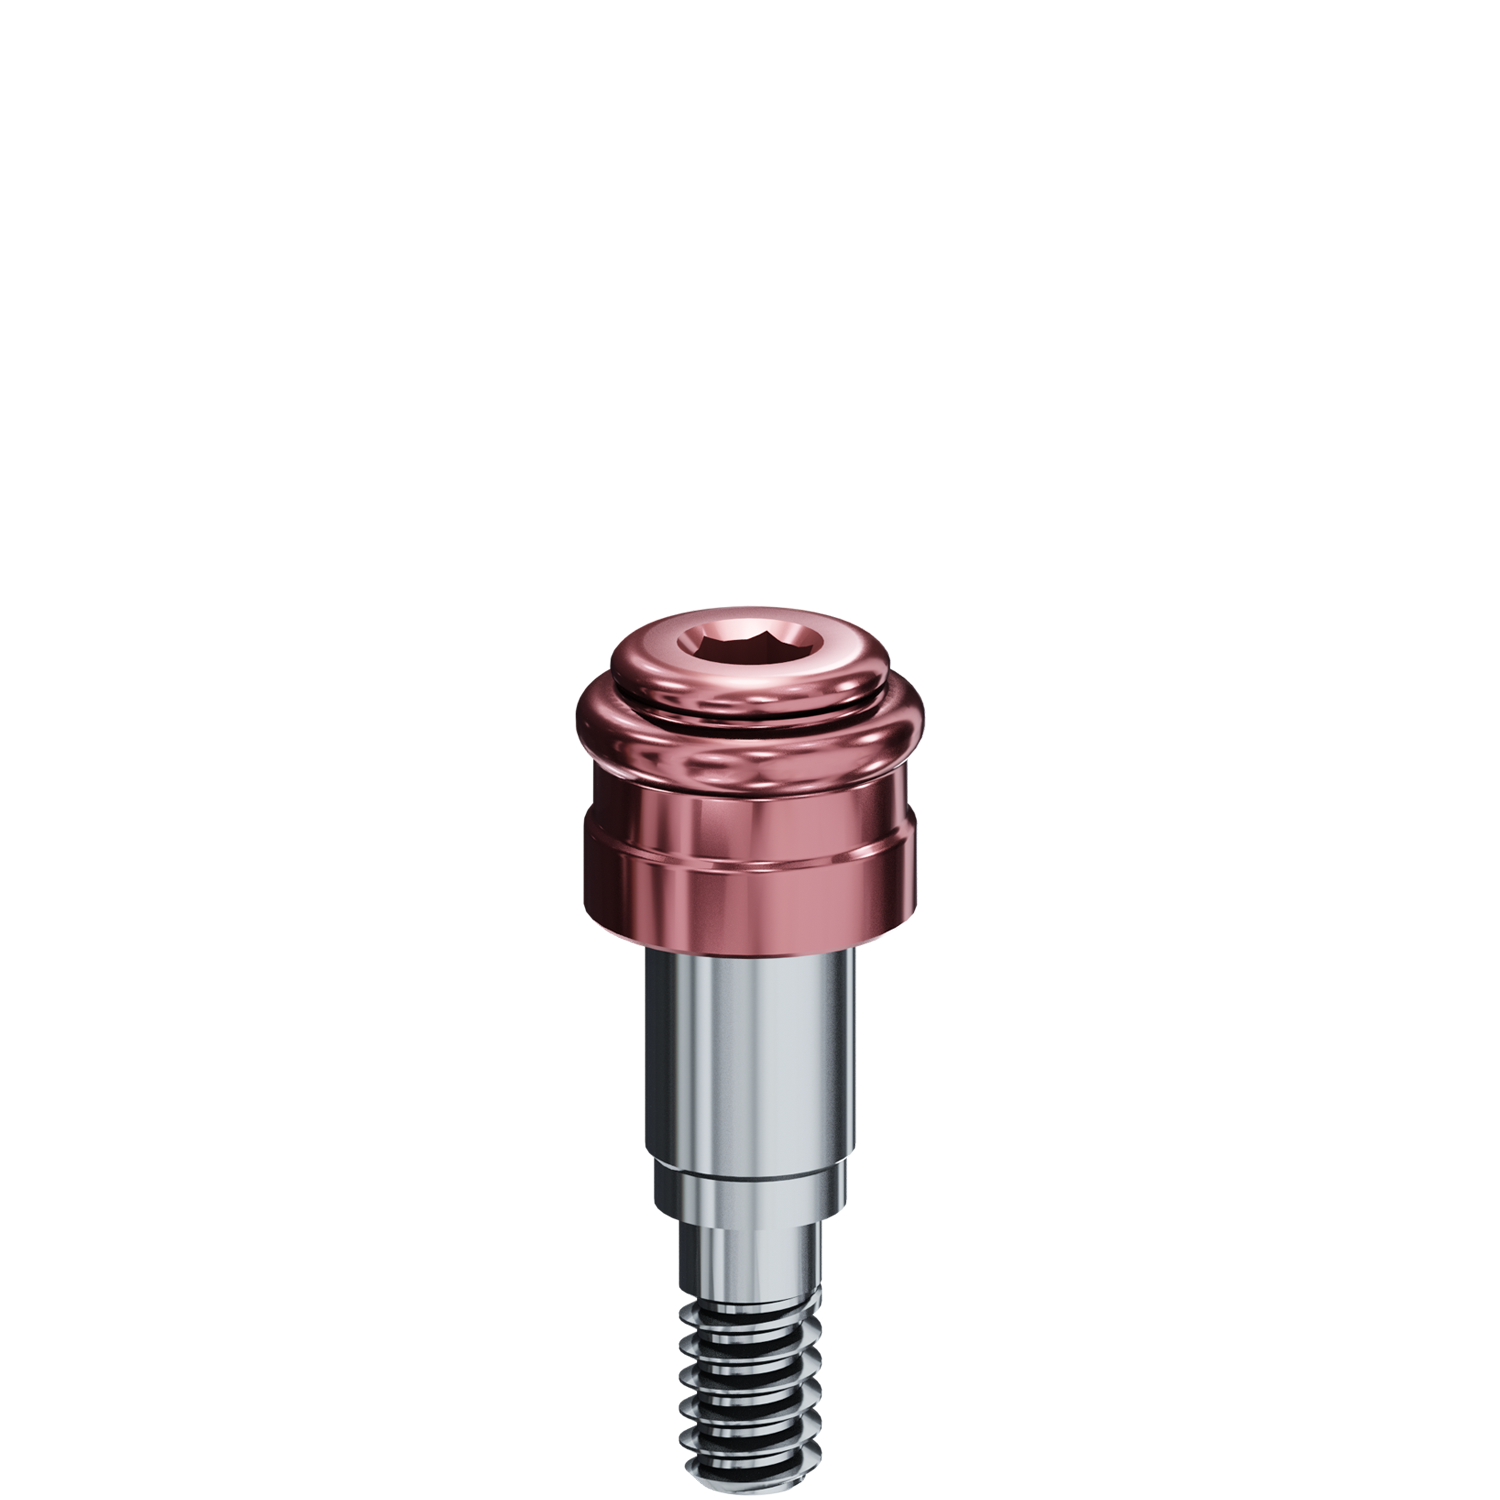 R-Tx Attachment System - 3.4mm Biomet 3i® Certain Connection - 048" Drive - 3.0mm